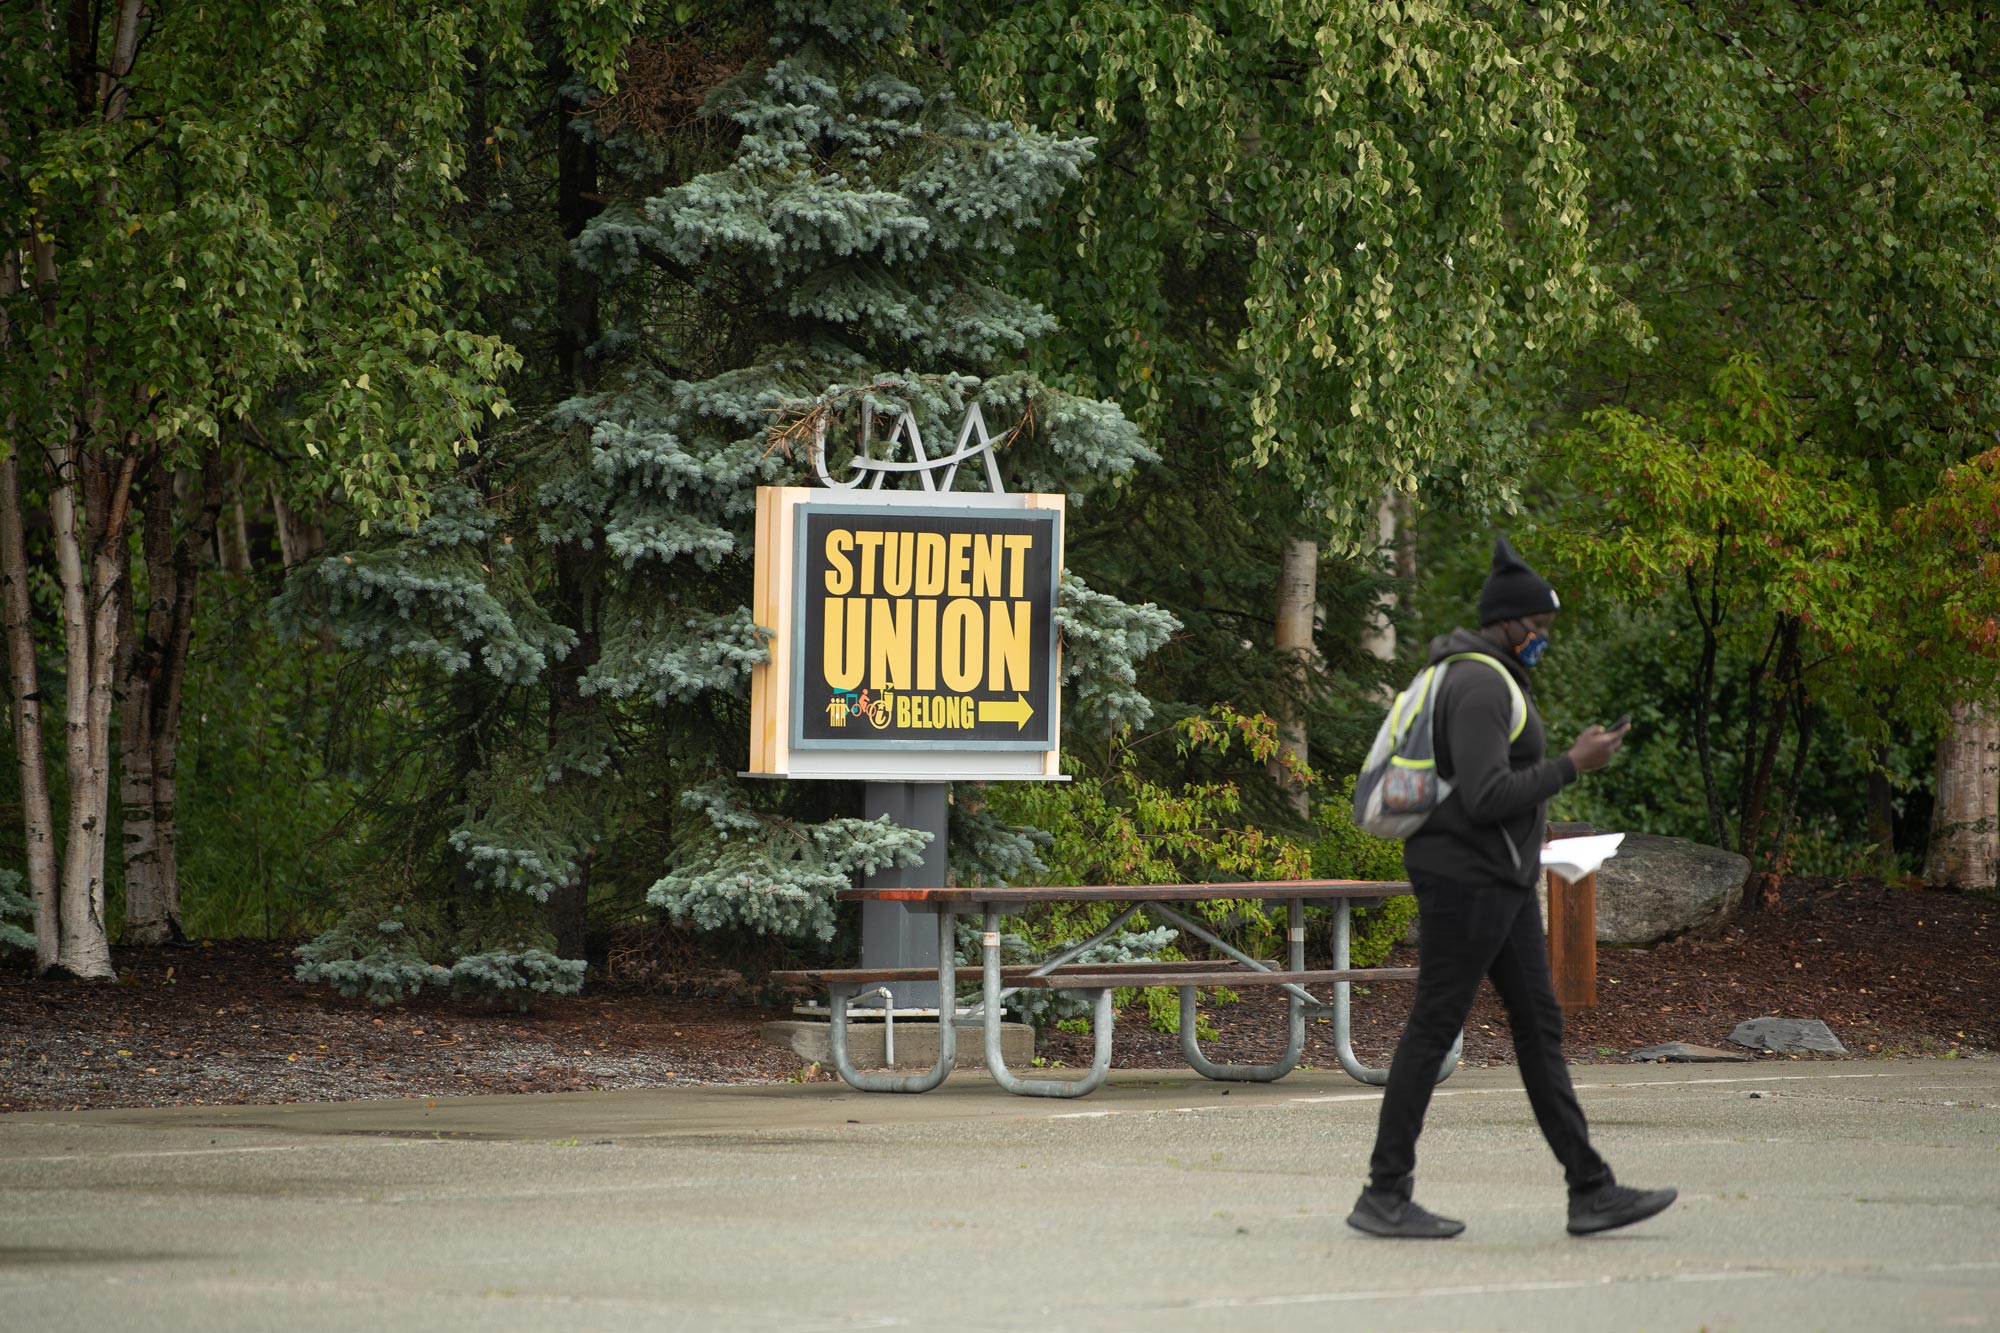 UAA's spring 2021 semester will continue with most classes being offered via distance learning.